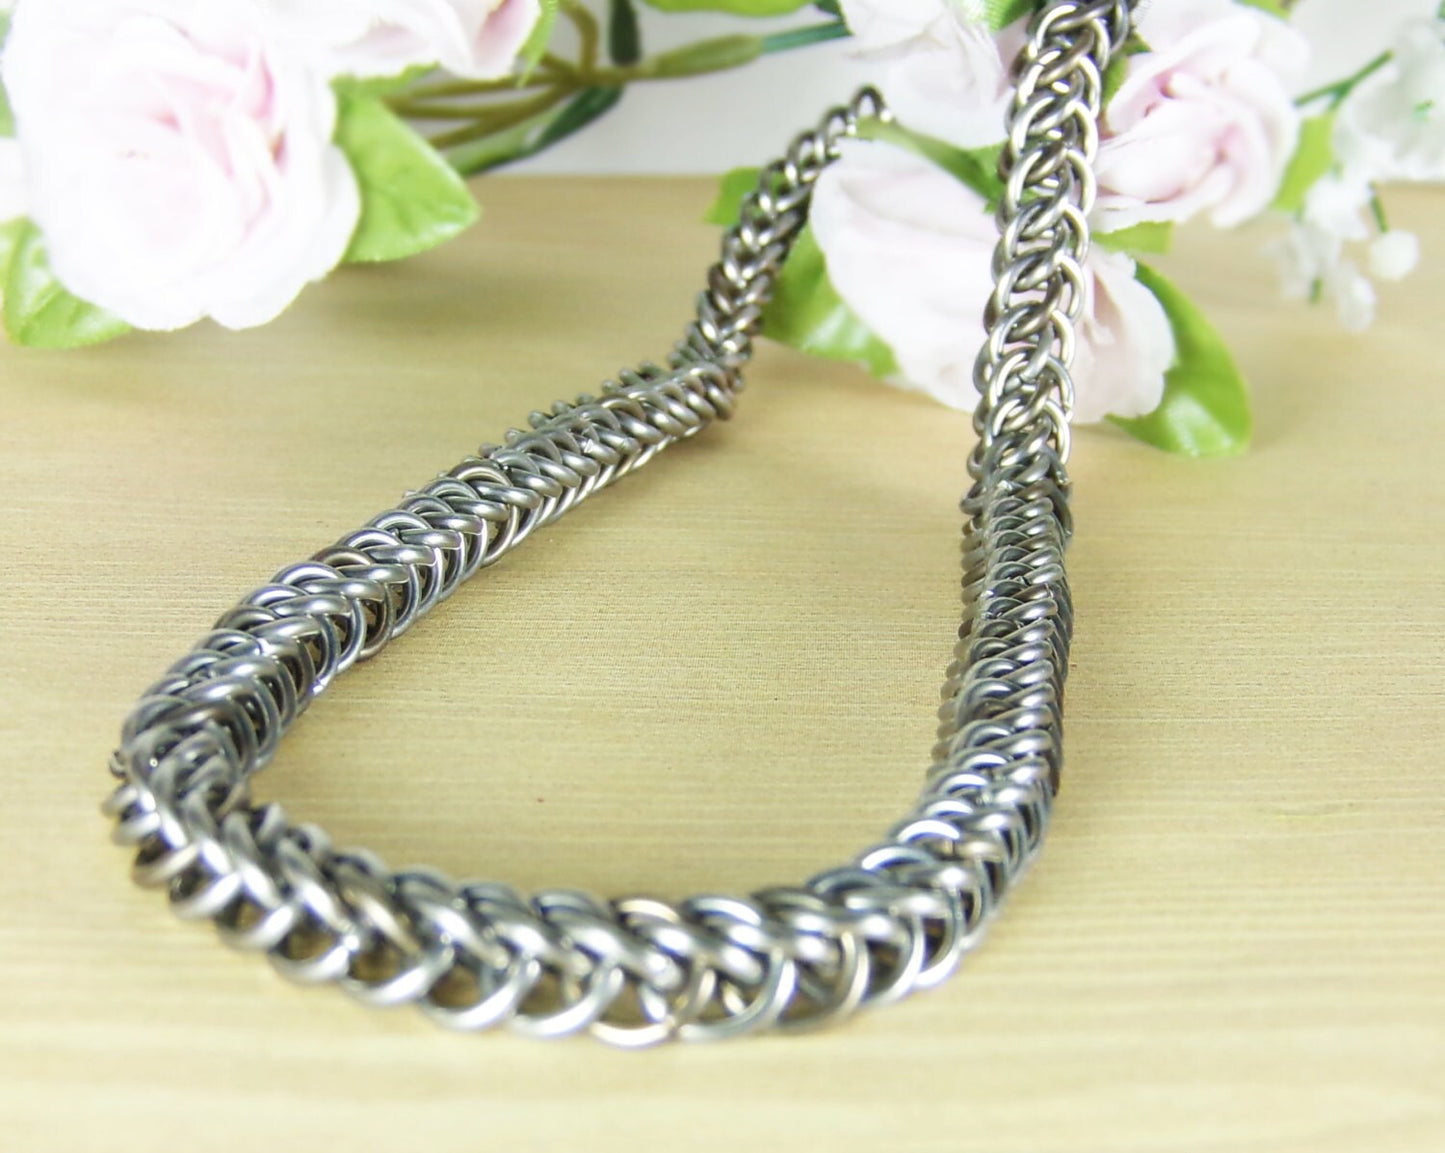 Stainless Steel Chainmaille Necklace - Half Persian Chainmaille Necklace - Stainless steel necklace- Hypoallergenic necklace